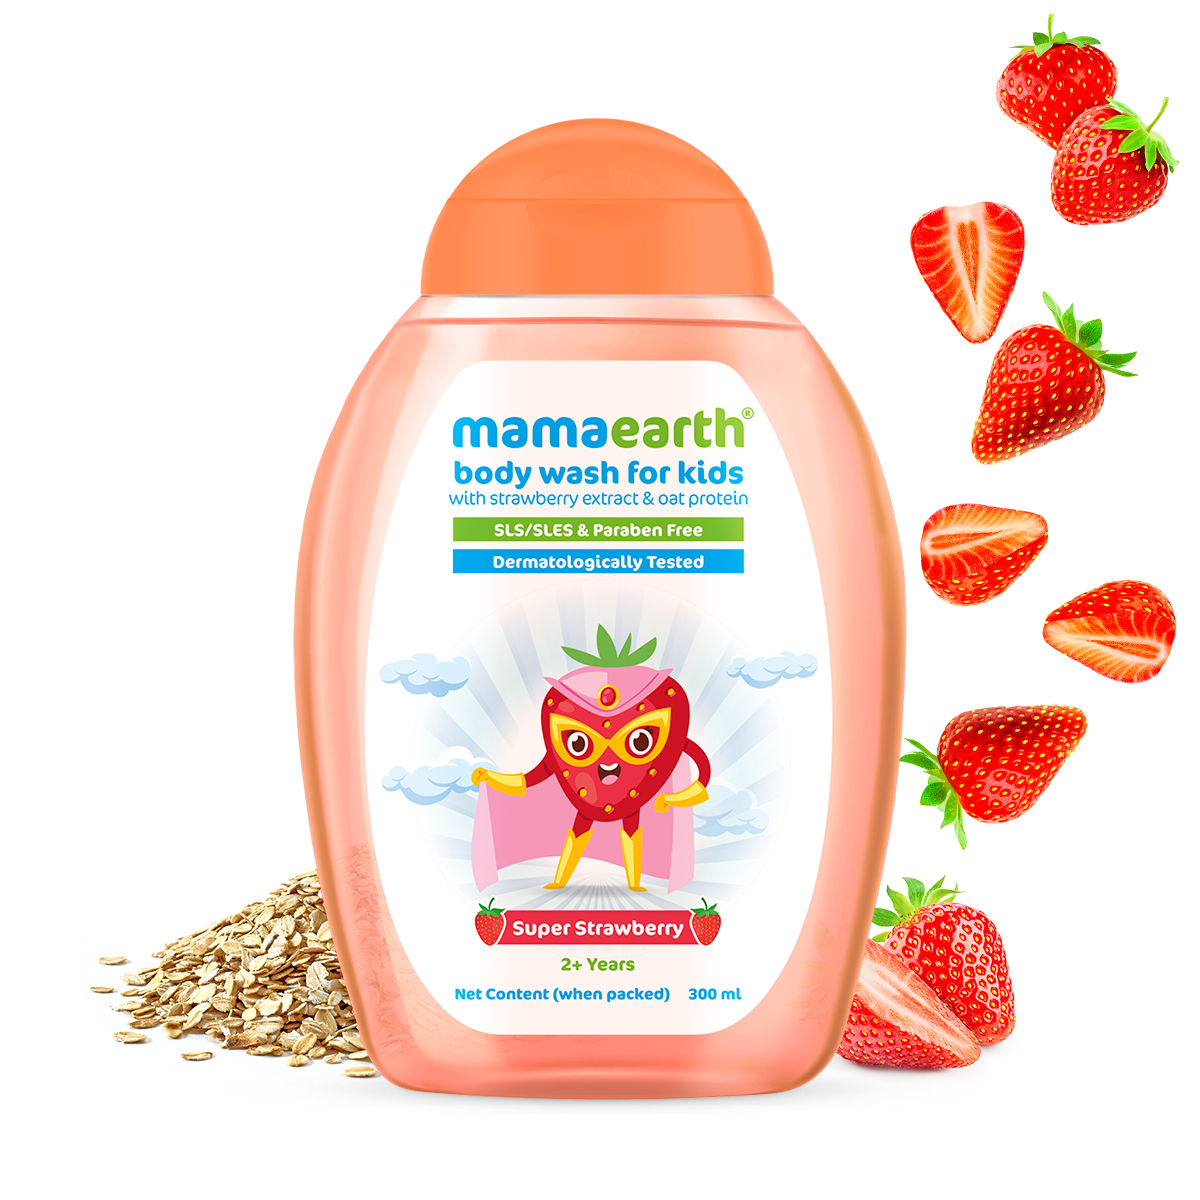 Mamaearth Super Strawberry Body Wash for Kids with Strawberry & Oat Protein